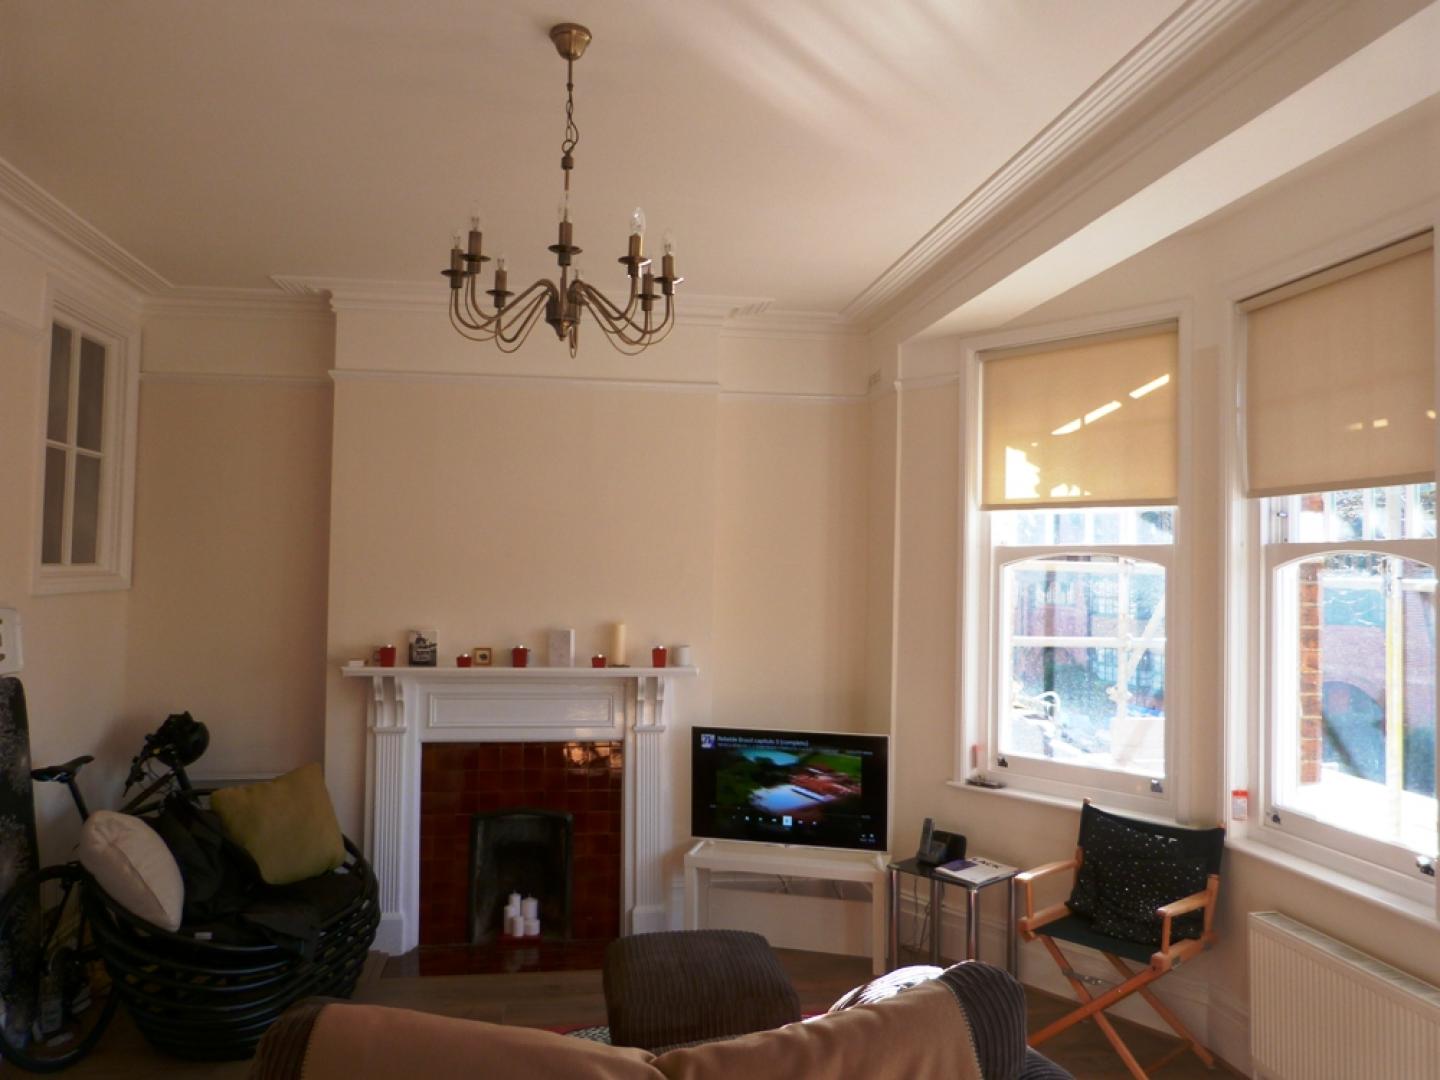 			Stunning Refurbished Property, 2 Bedroom, 1 bath, 1 reception Flat			 Fortis Green Road, Muswell Hill